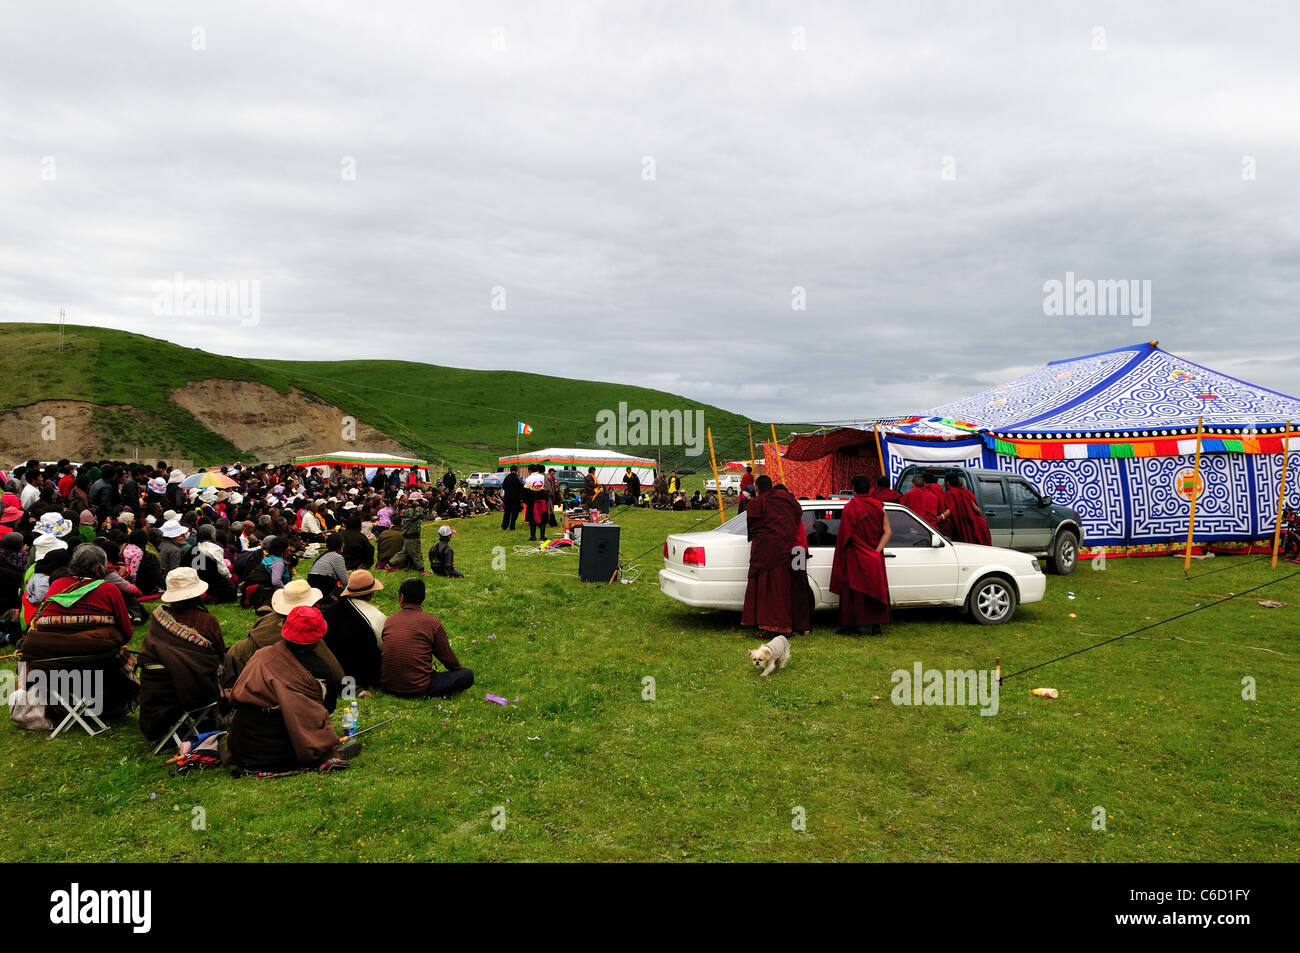 Tibetans gathering at a religious ceremony. Sichuan, China. Stock Photo